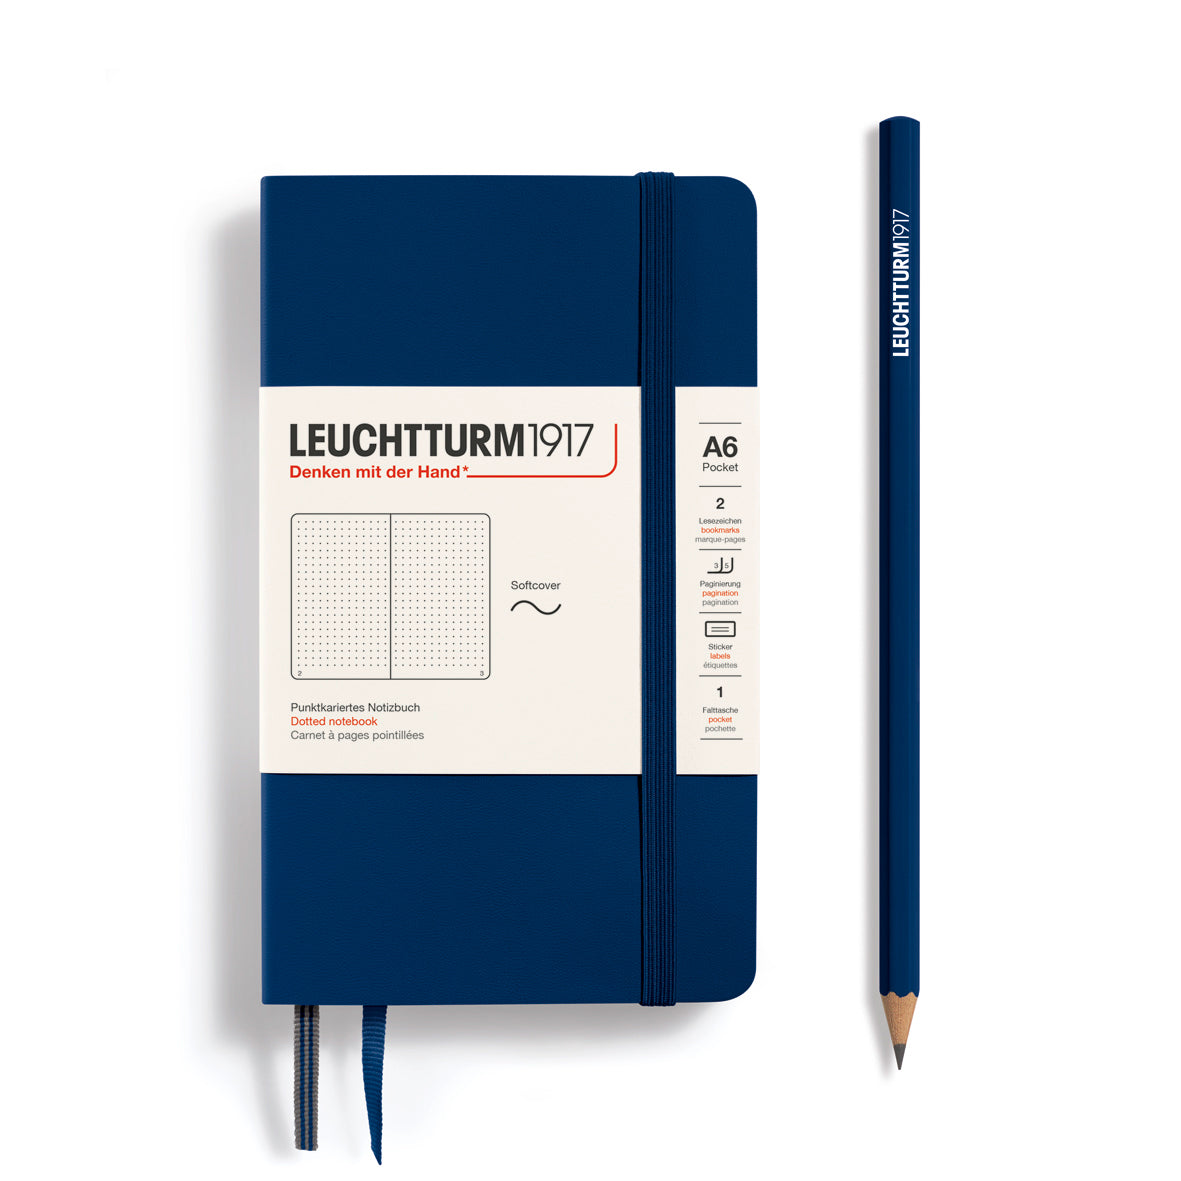 LEUCHTTURM1917 Notebook A6 Pocket Softcover in navy blue and dotted inside at Penny Black